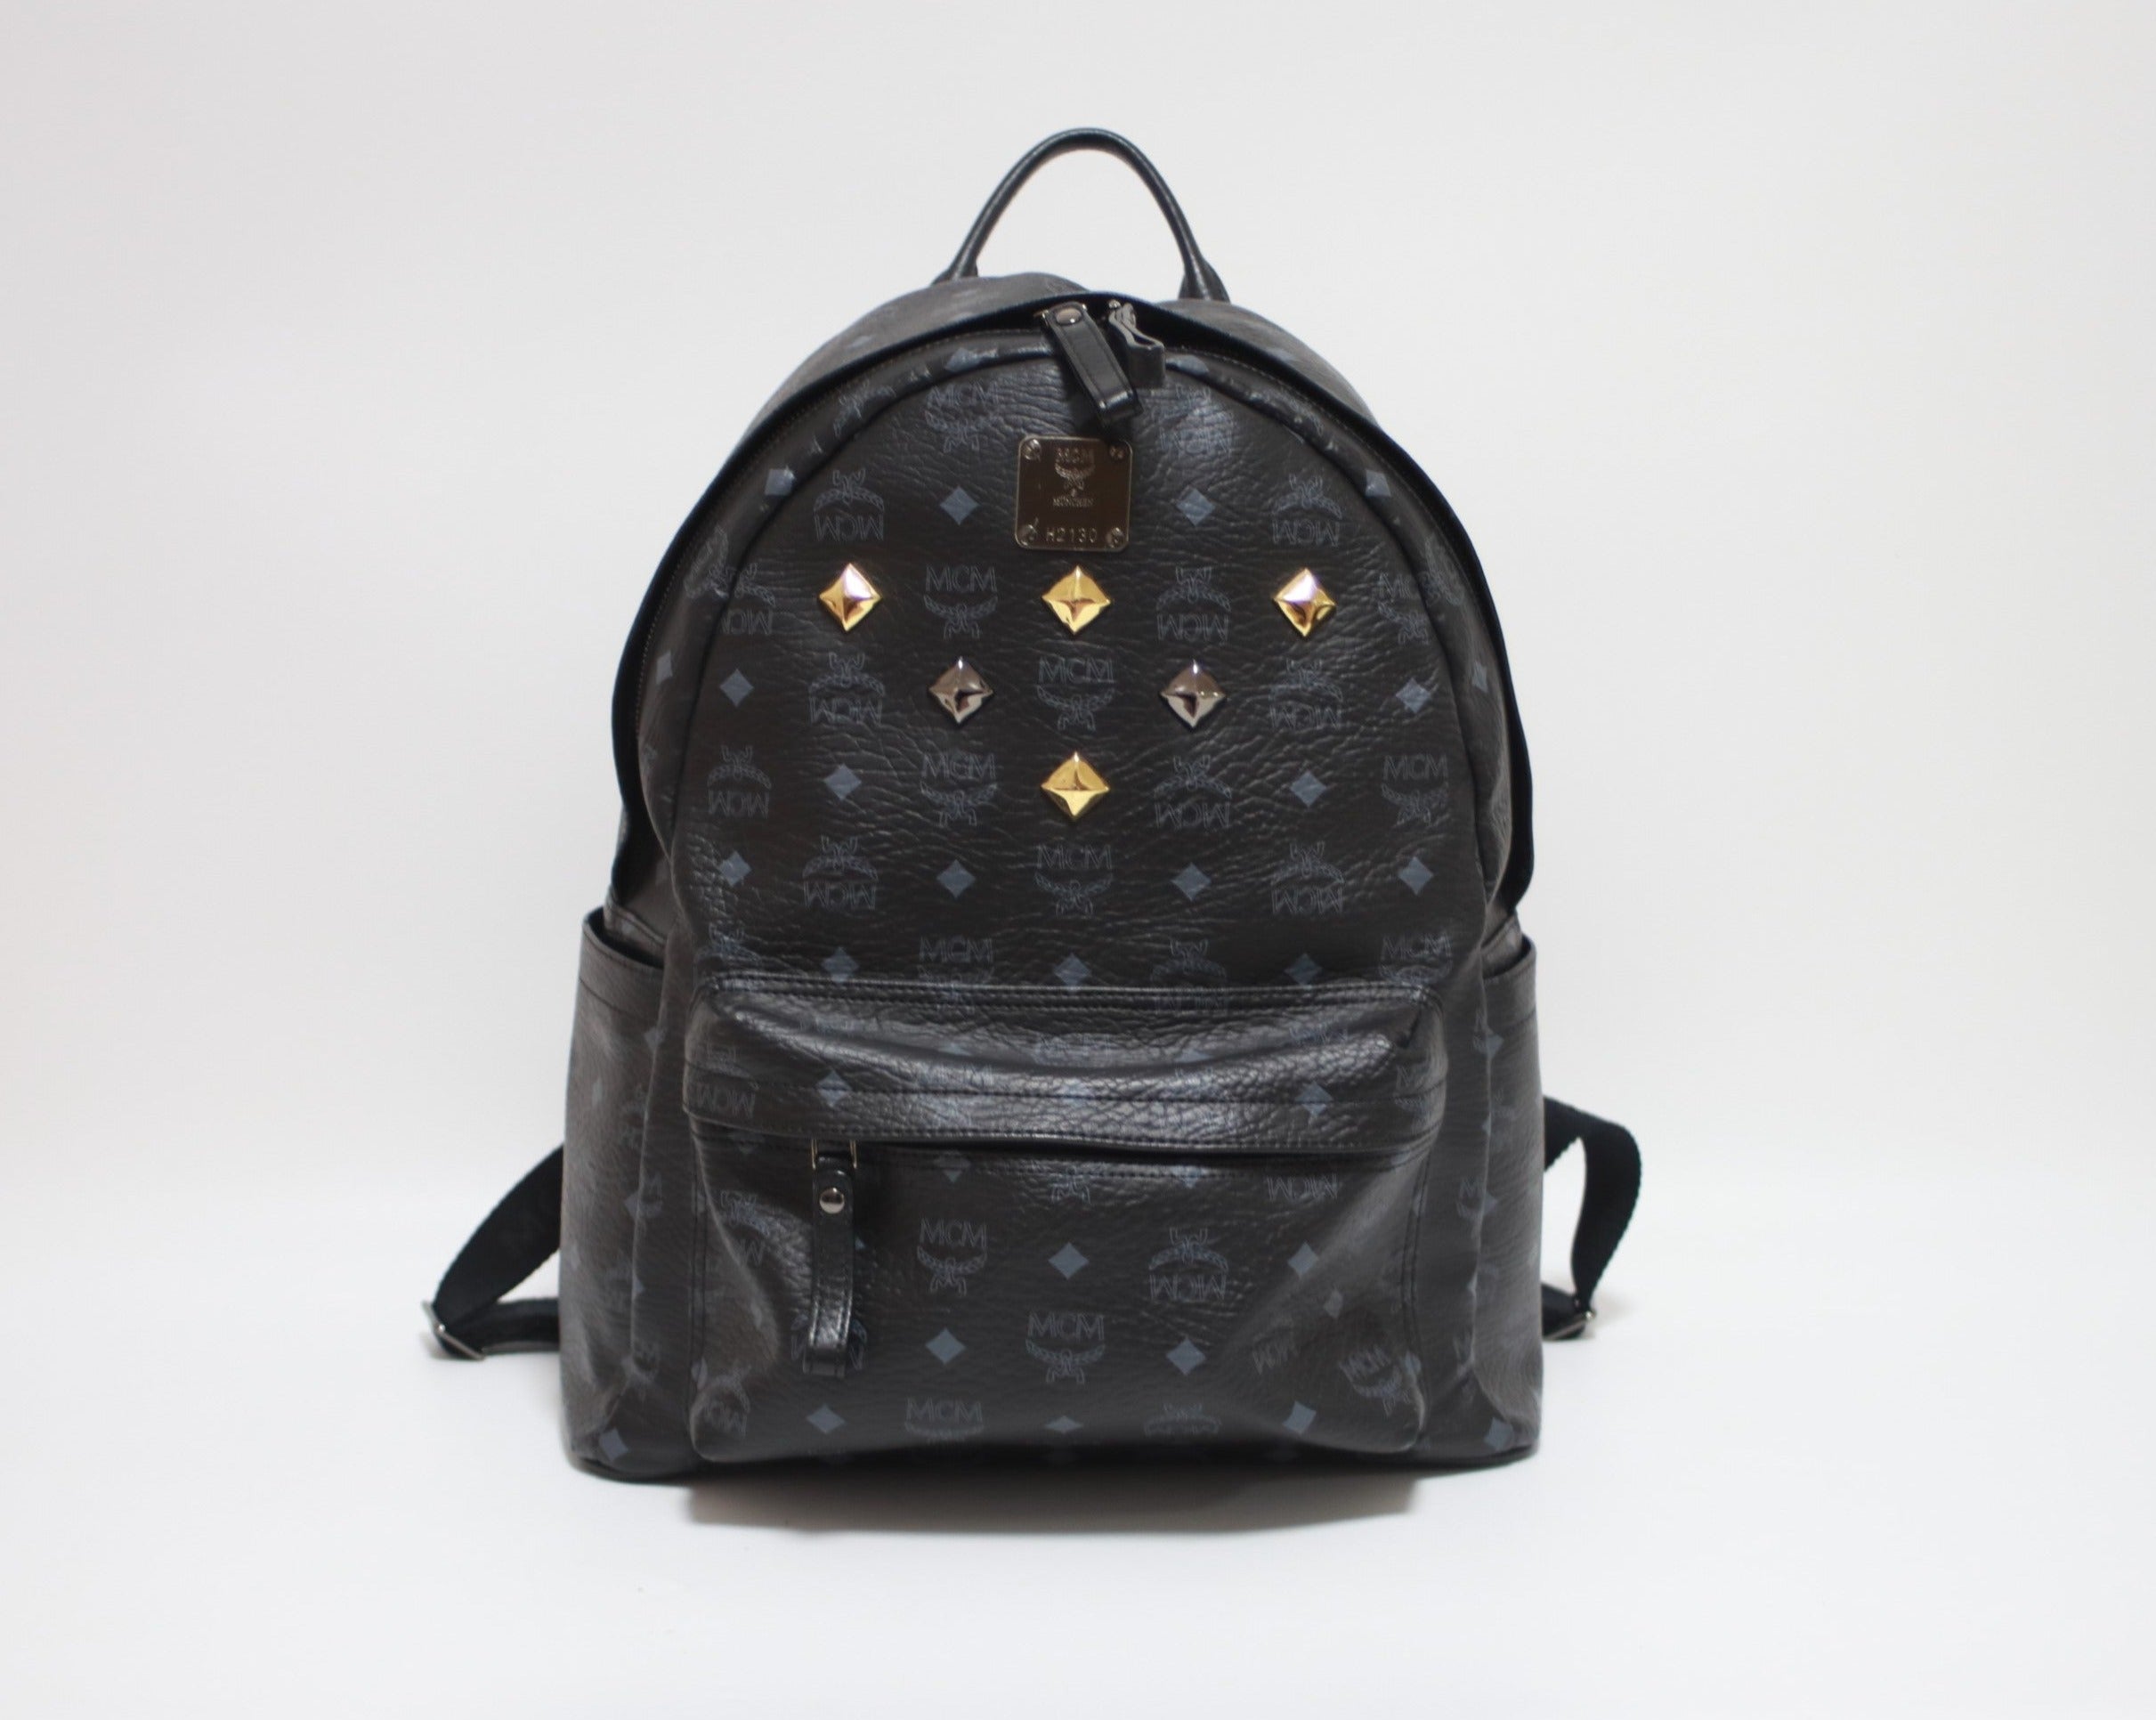 MCM Backpack Pouch Black Color Used (7783)